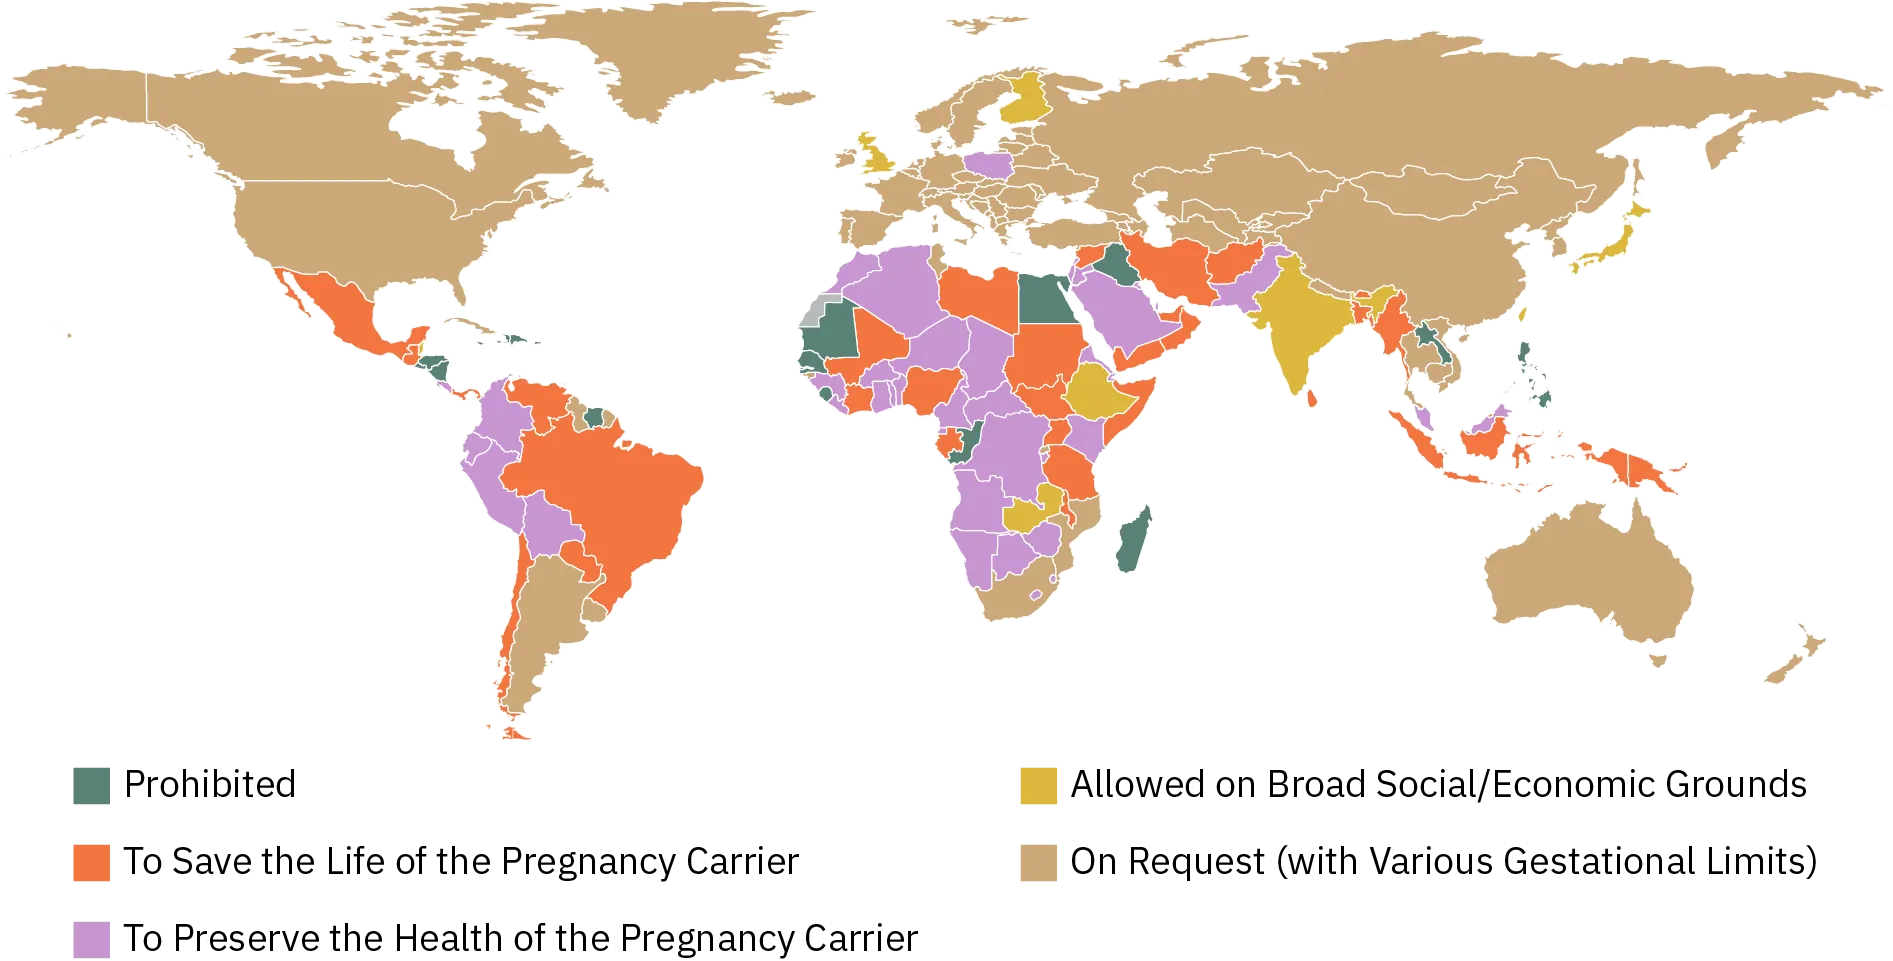 A map of the world with shading to indicate the legality of abortion. In the following nations/regions abortion is available on request, with various gestational limits: Russia, Turkey, China, Australia, most of Europe, Canada, the United States, Argentina, and South Africa. In the following nations/regions abortion is allowed on broad social/economic grounds: India, Japan, Finland, England, Ethiopia, Democratic Republic of the Congo. In the following nations/regions, abortion is allowed to save or preserve the health of the pregnancy carrier: most of Africa, most of South America, most of the Middle East, Mexico, and Poland. In the following nations/regions, abortion is prohibited entirely: Egypt, Iran, the Philippines, portions of Africa, potions of Central America.